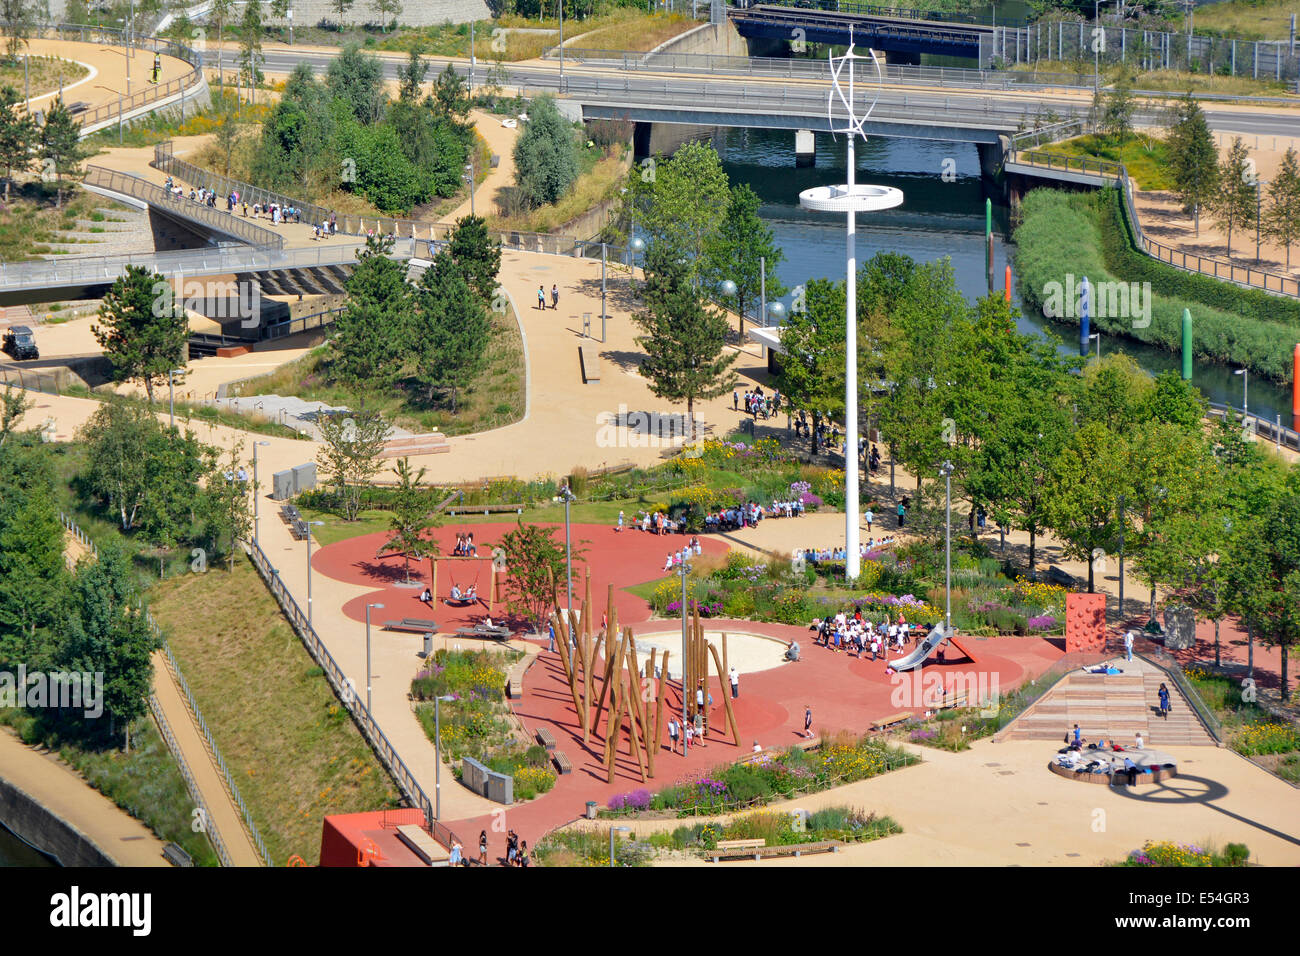 Aerial view looking down on childrens legacy playground in Queen Elizabeth Olympic Park re landscaping after 2012 London Olympics Stratford England UK Stock Photo